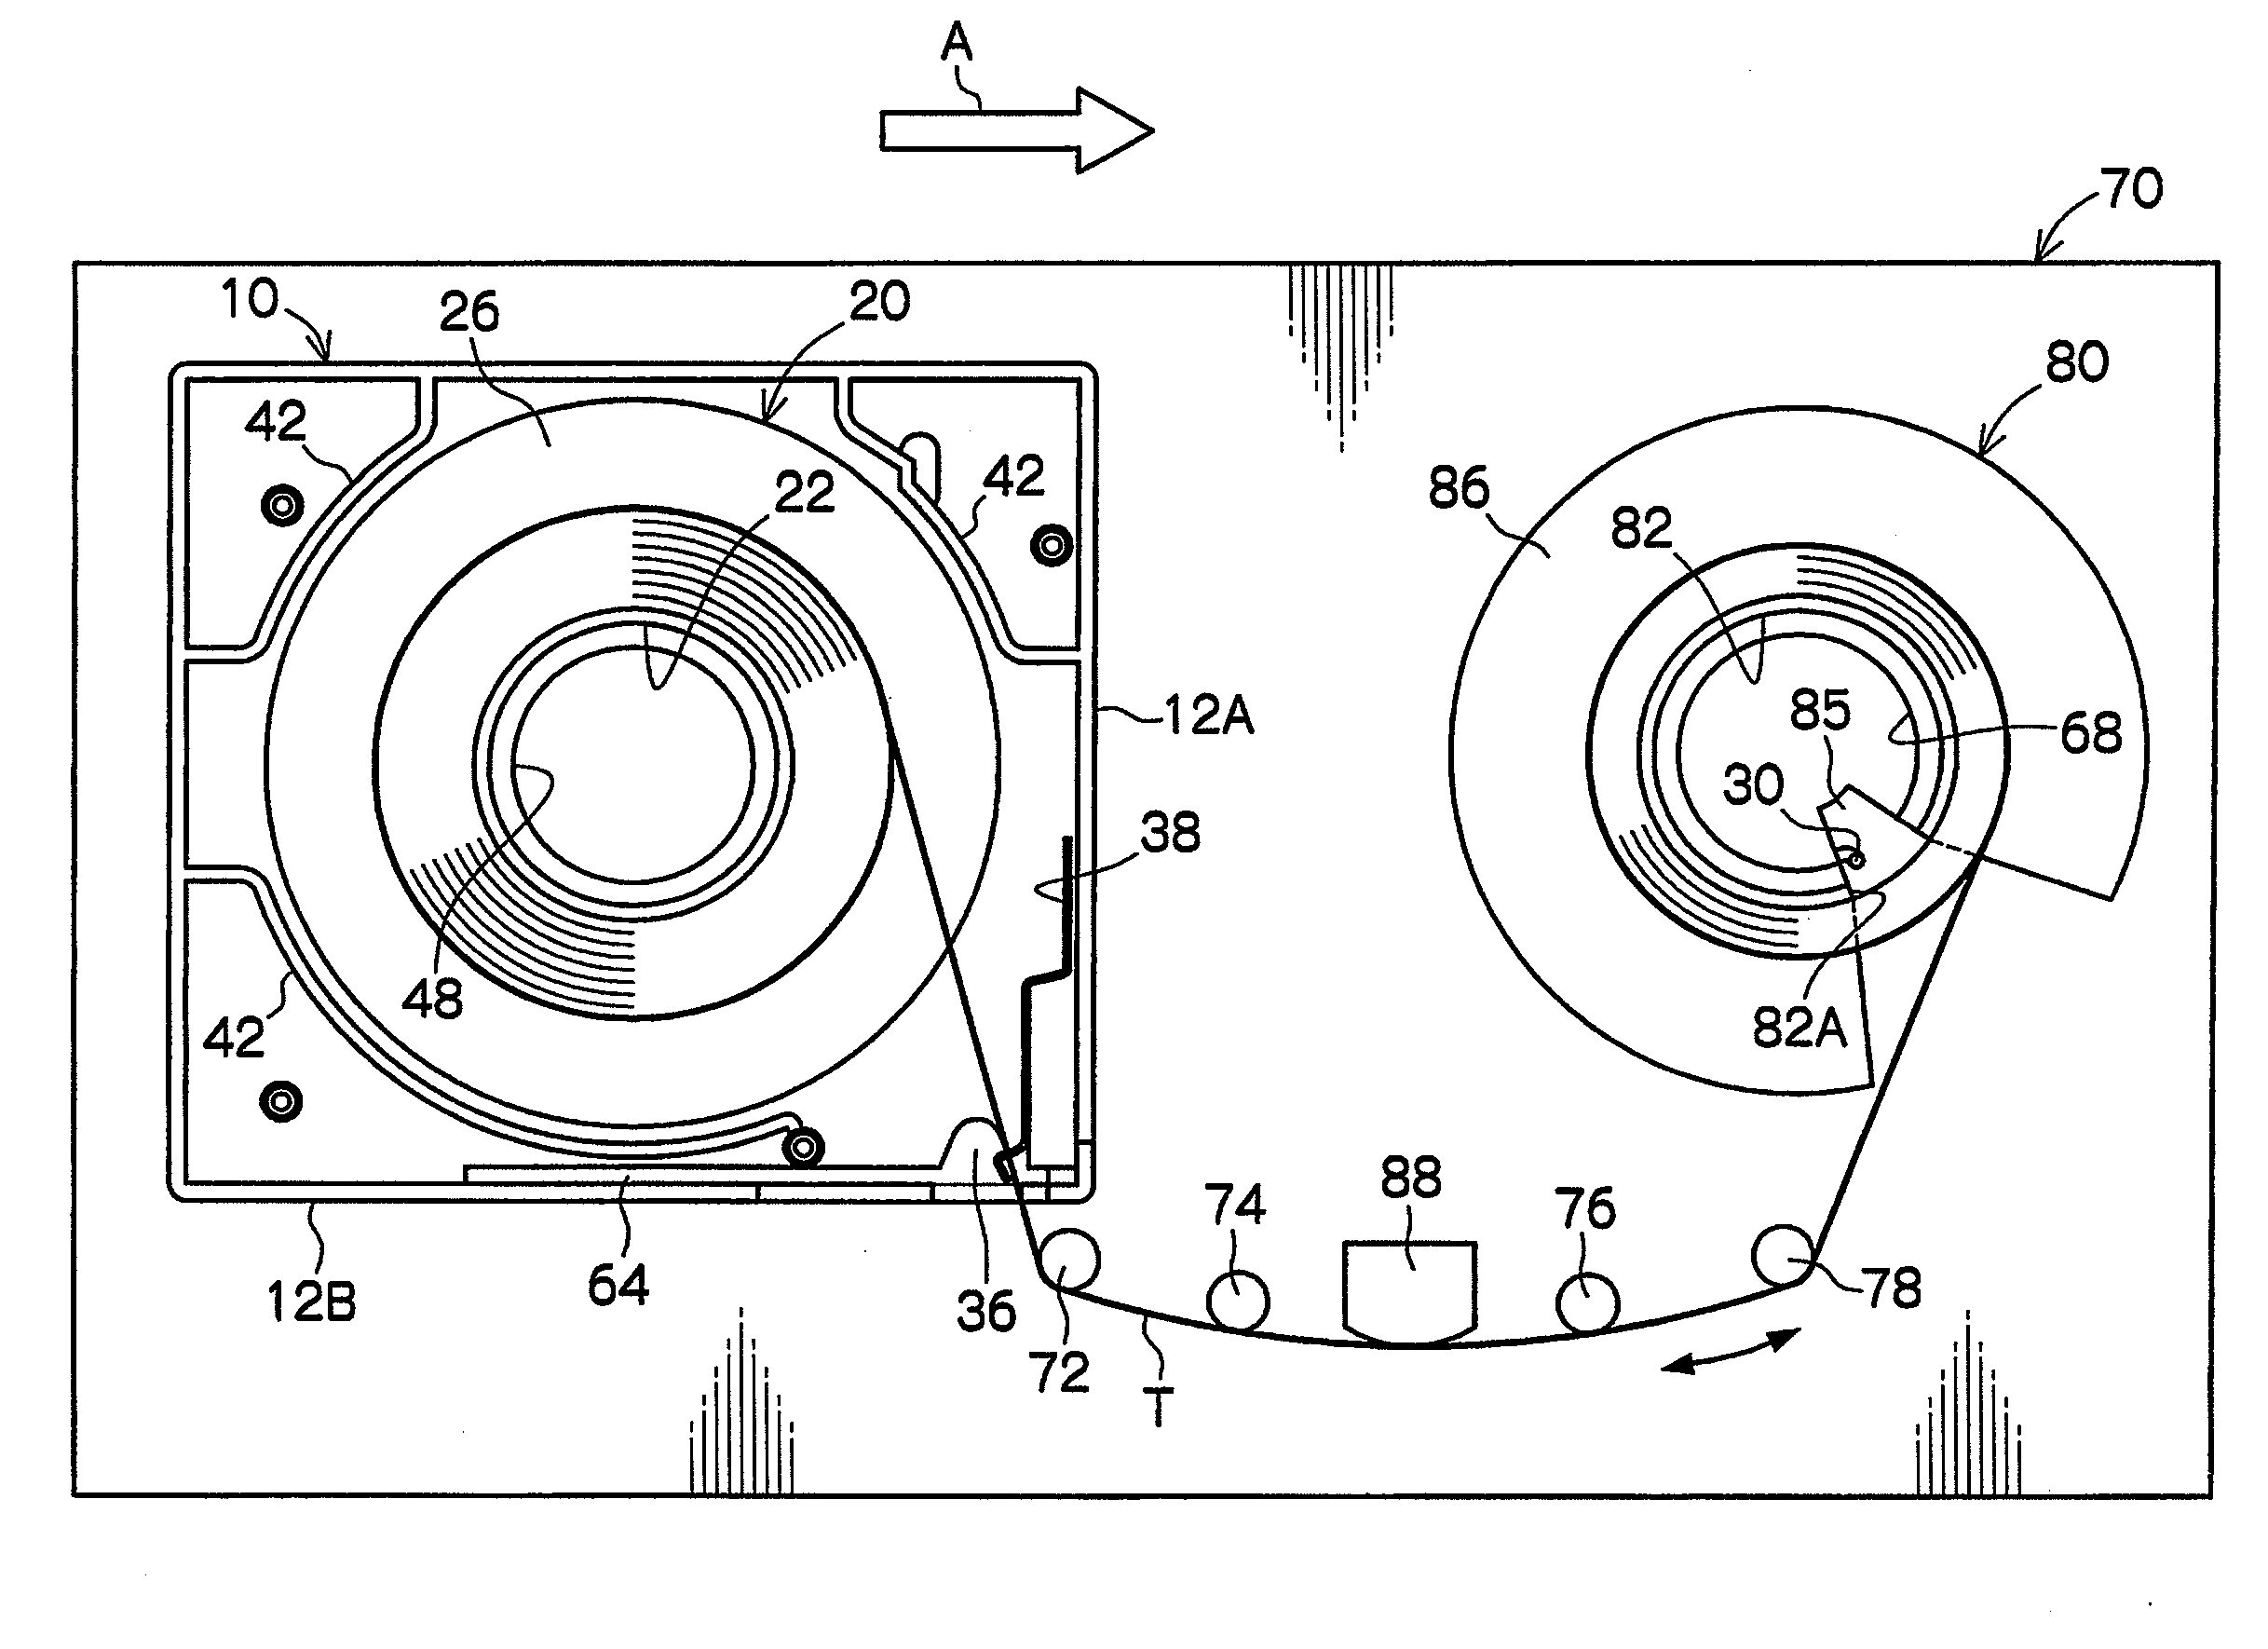 Tape reel, recording tape cartridge, take-up reel, and drive device